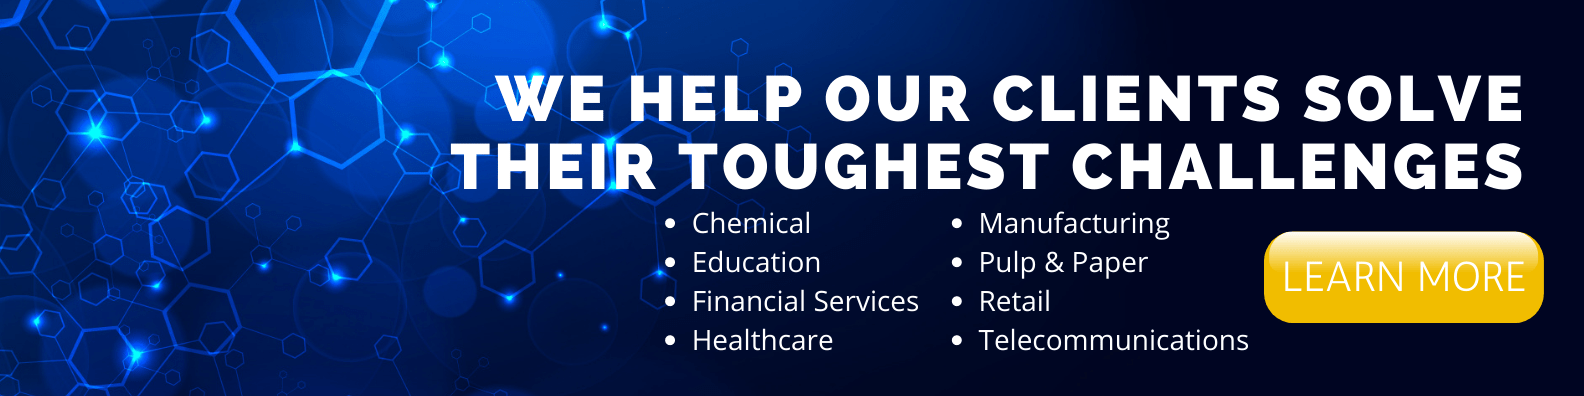 We help our clients solve their toughest challenges.